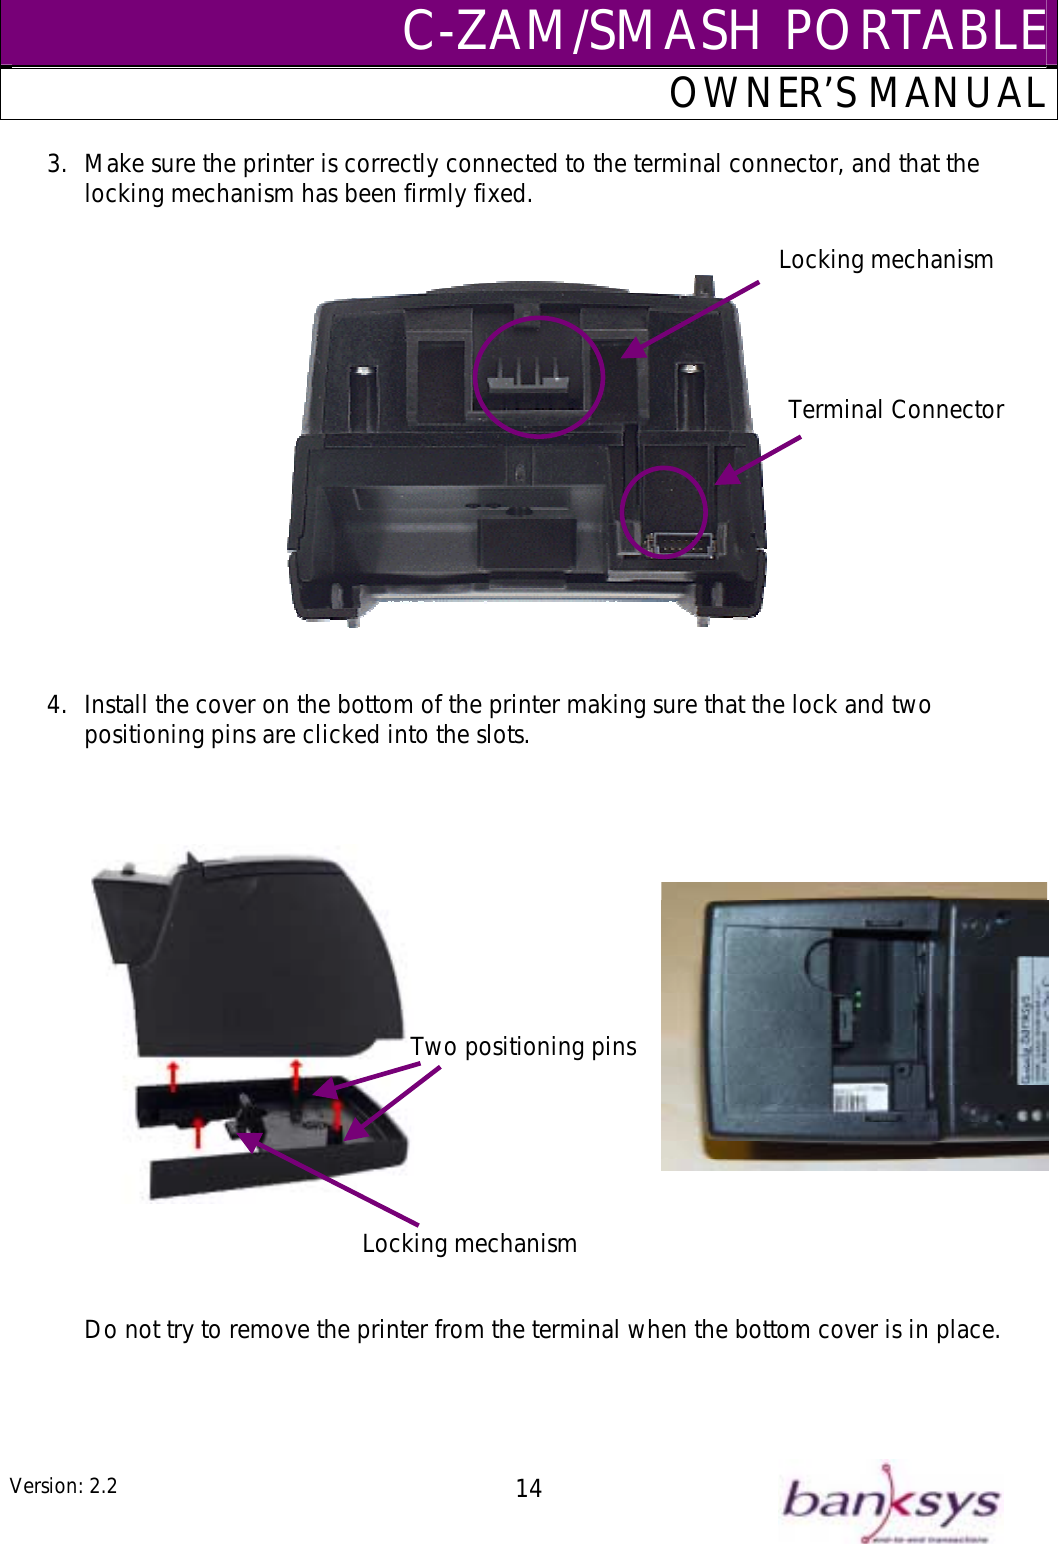 C-ZAM/SMASH PORTABLEOWNER’S MANUAL 3.  Make sure the printer is correctly connected to the terminal connector, and that the locking mechanism has been firmly fixed.   Locking mechanismTerminal Connector   4.  Install the cover on the bottom of the printer making sure that the lock and two positioning pins are clicked into the slots.                    Do not try to remove the printer from the terminal when the bottom cover is in place.       Two positioning pinsLocking mechanism Version: 2.2  14